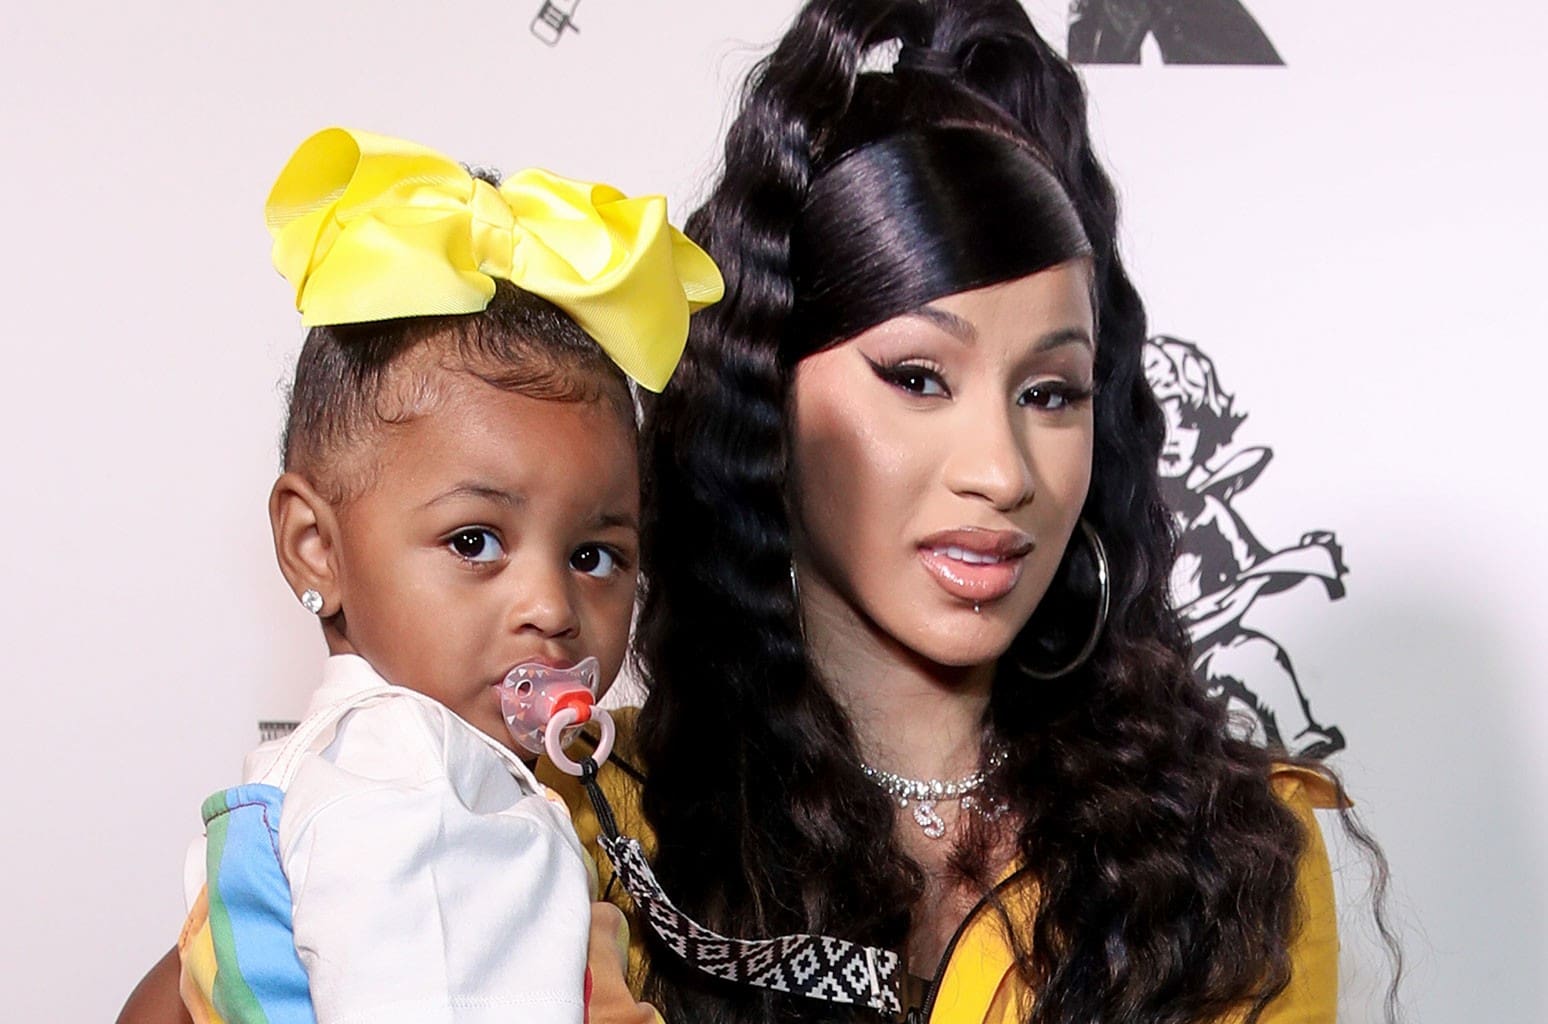 ”cardi-b-lands-in-massive-scandal-following-hateful-comments-directed-at-her-daughter”